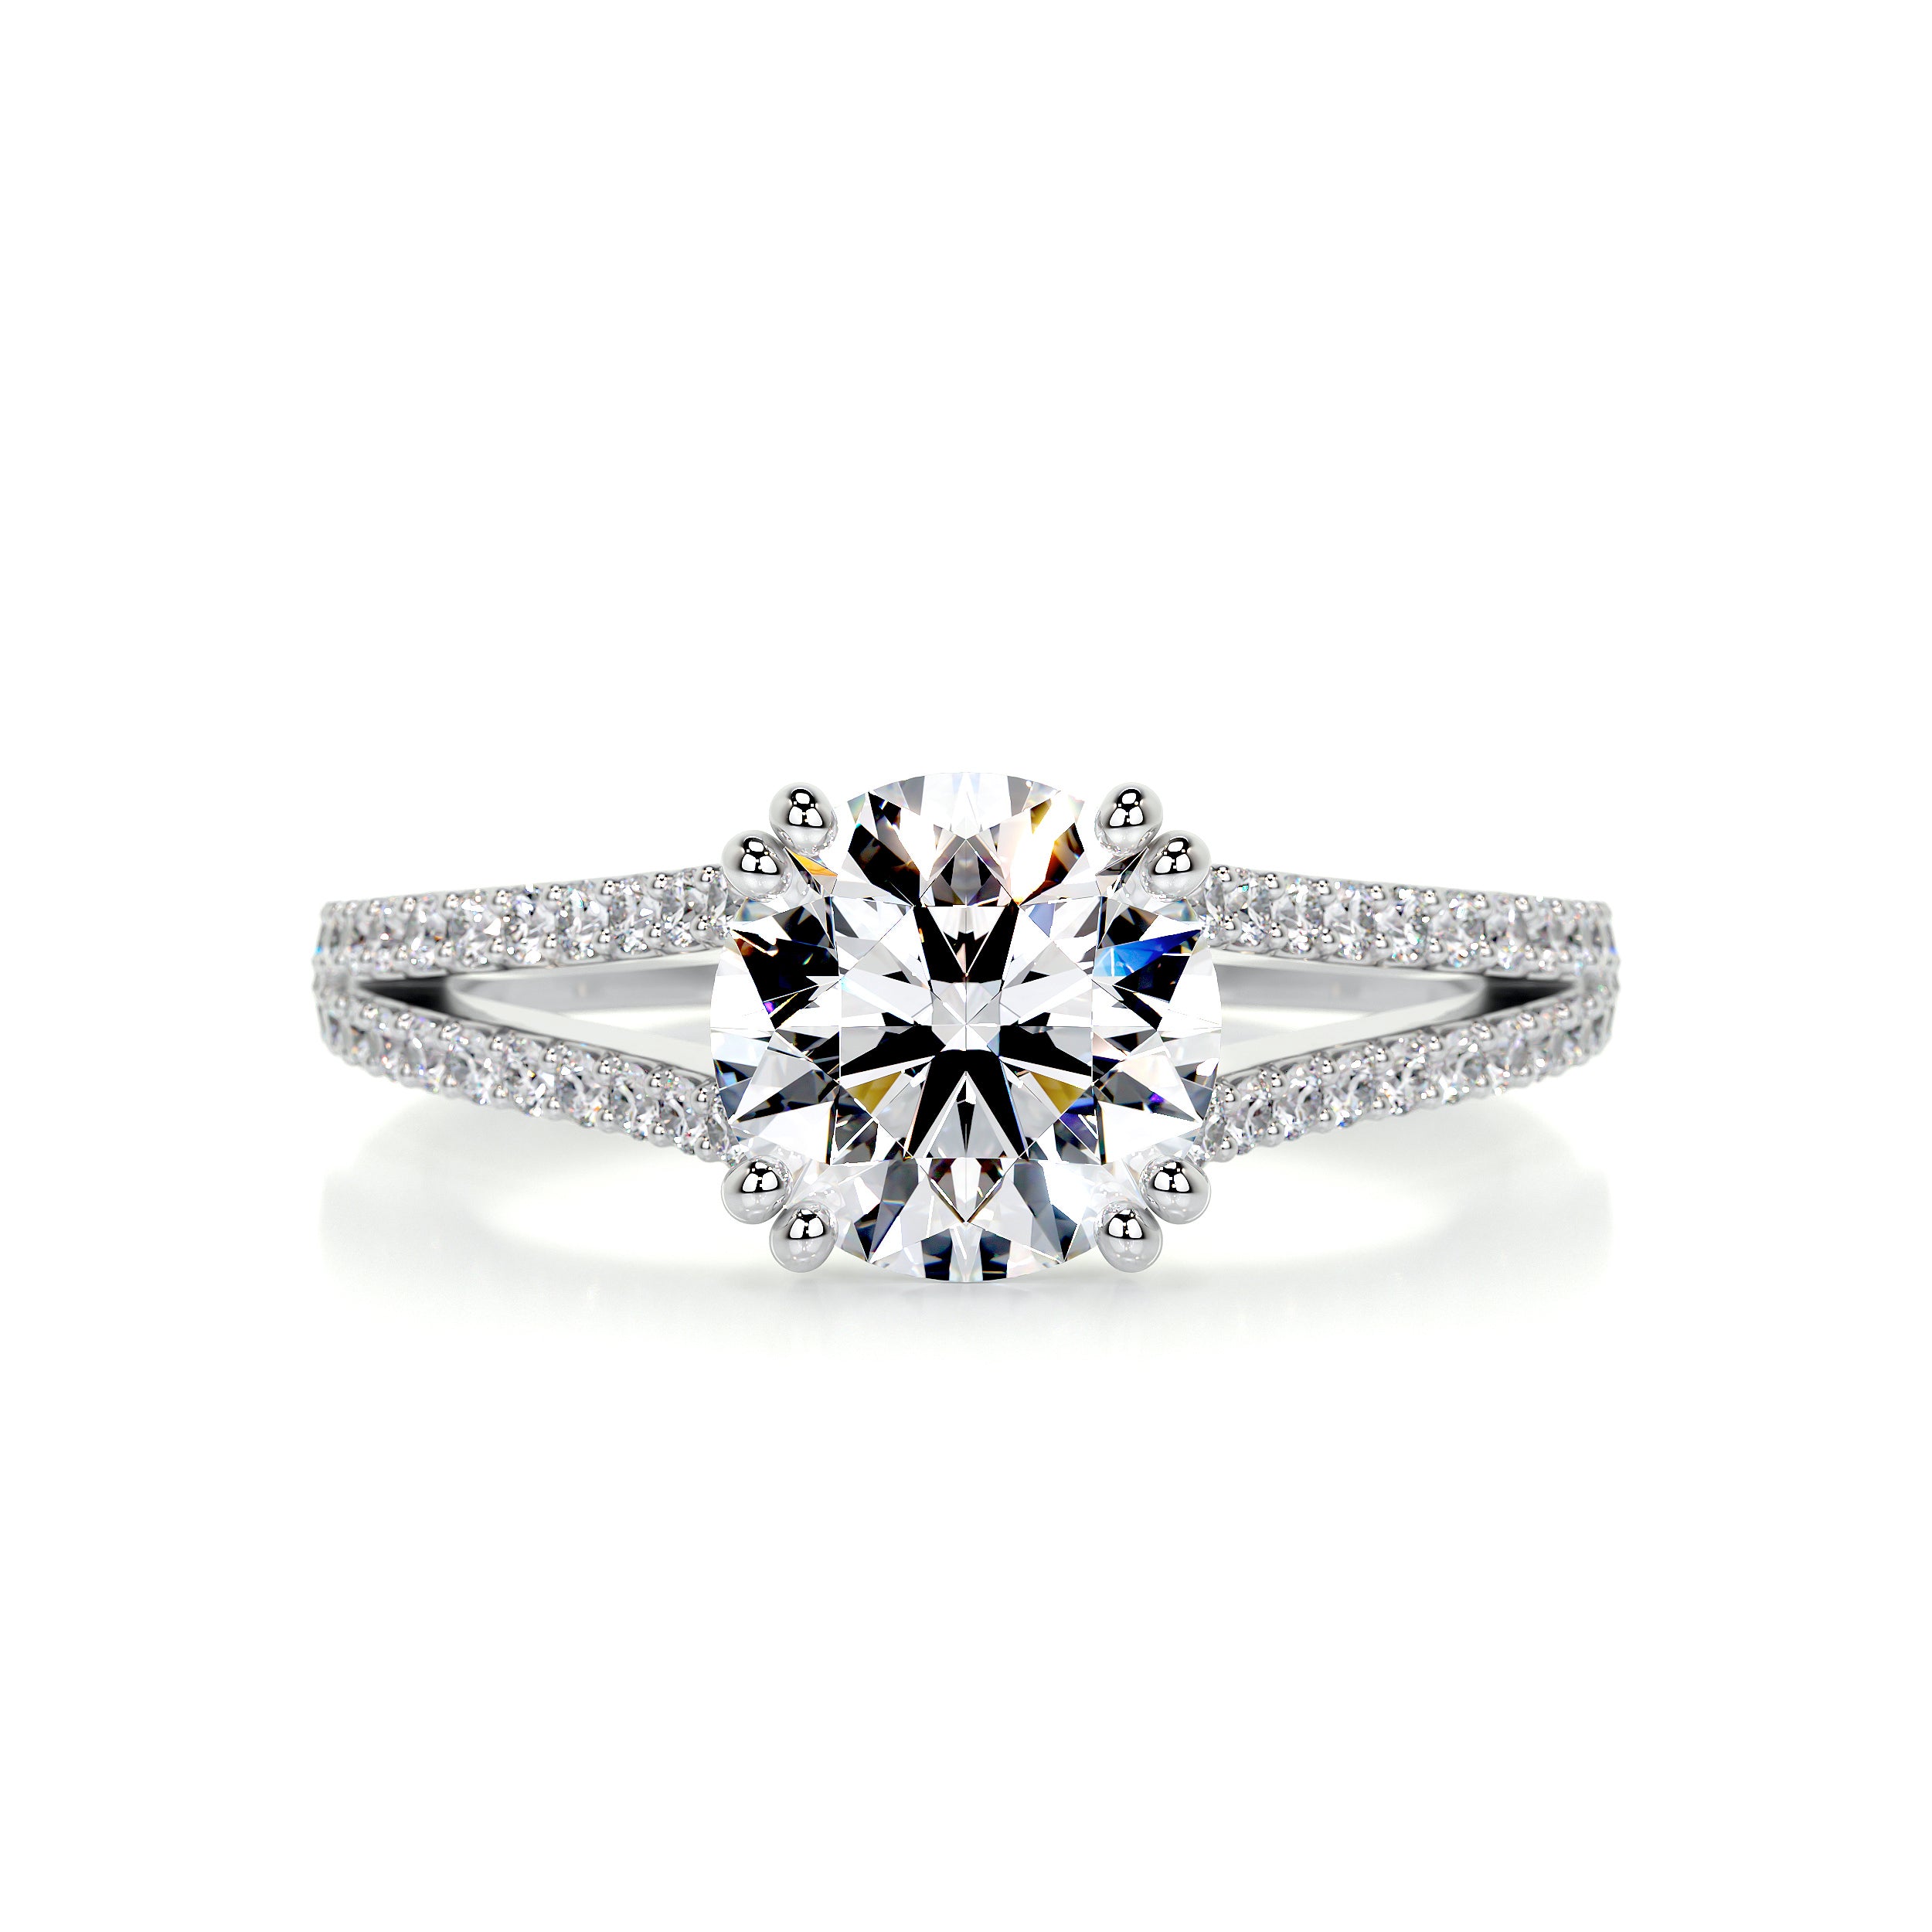 Most expensive diamond rings | Most beautiful engagement rings, Most expensive  engagement ring, Beautiful engagement rings